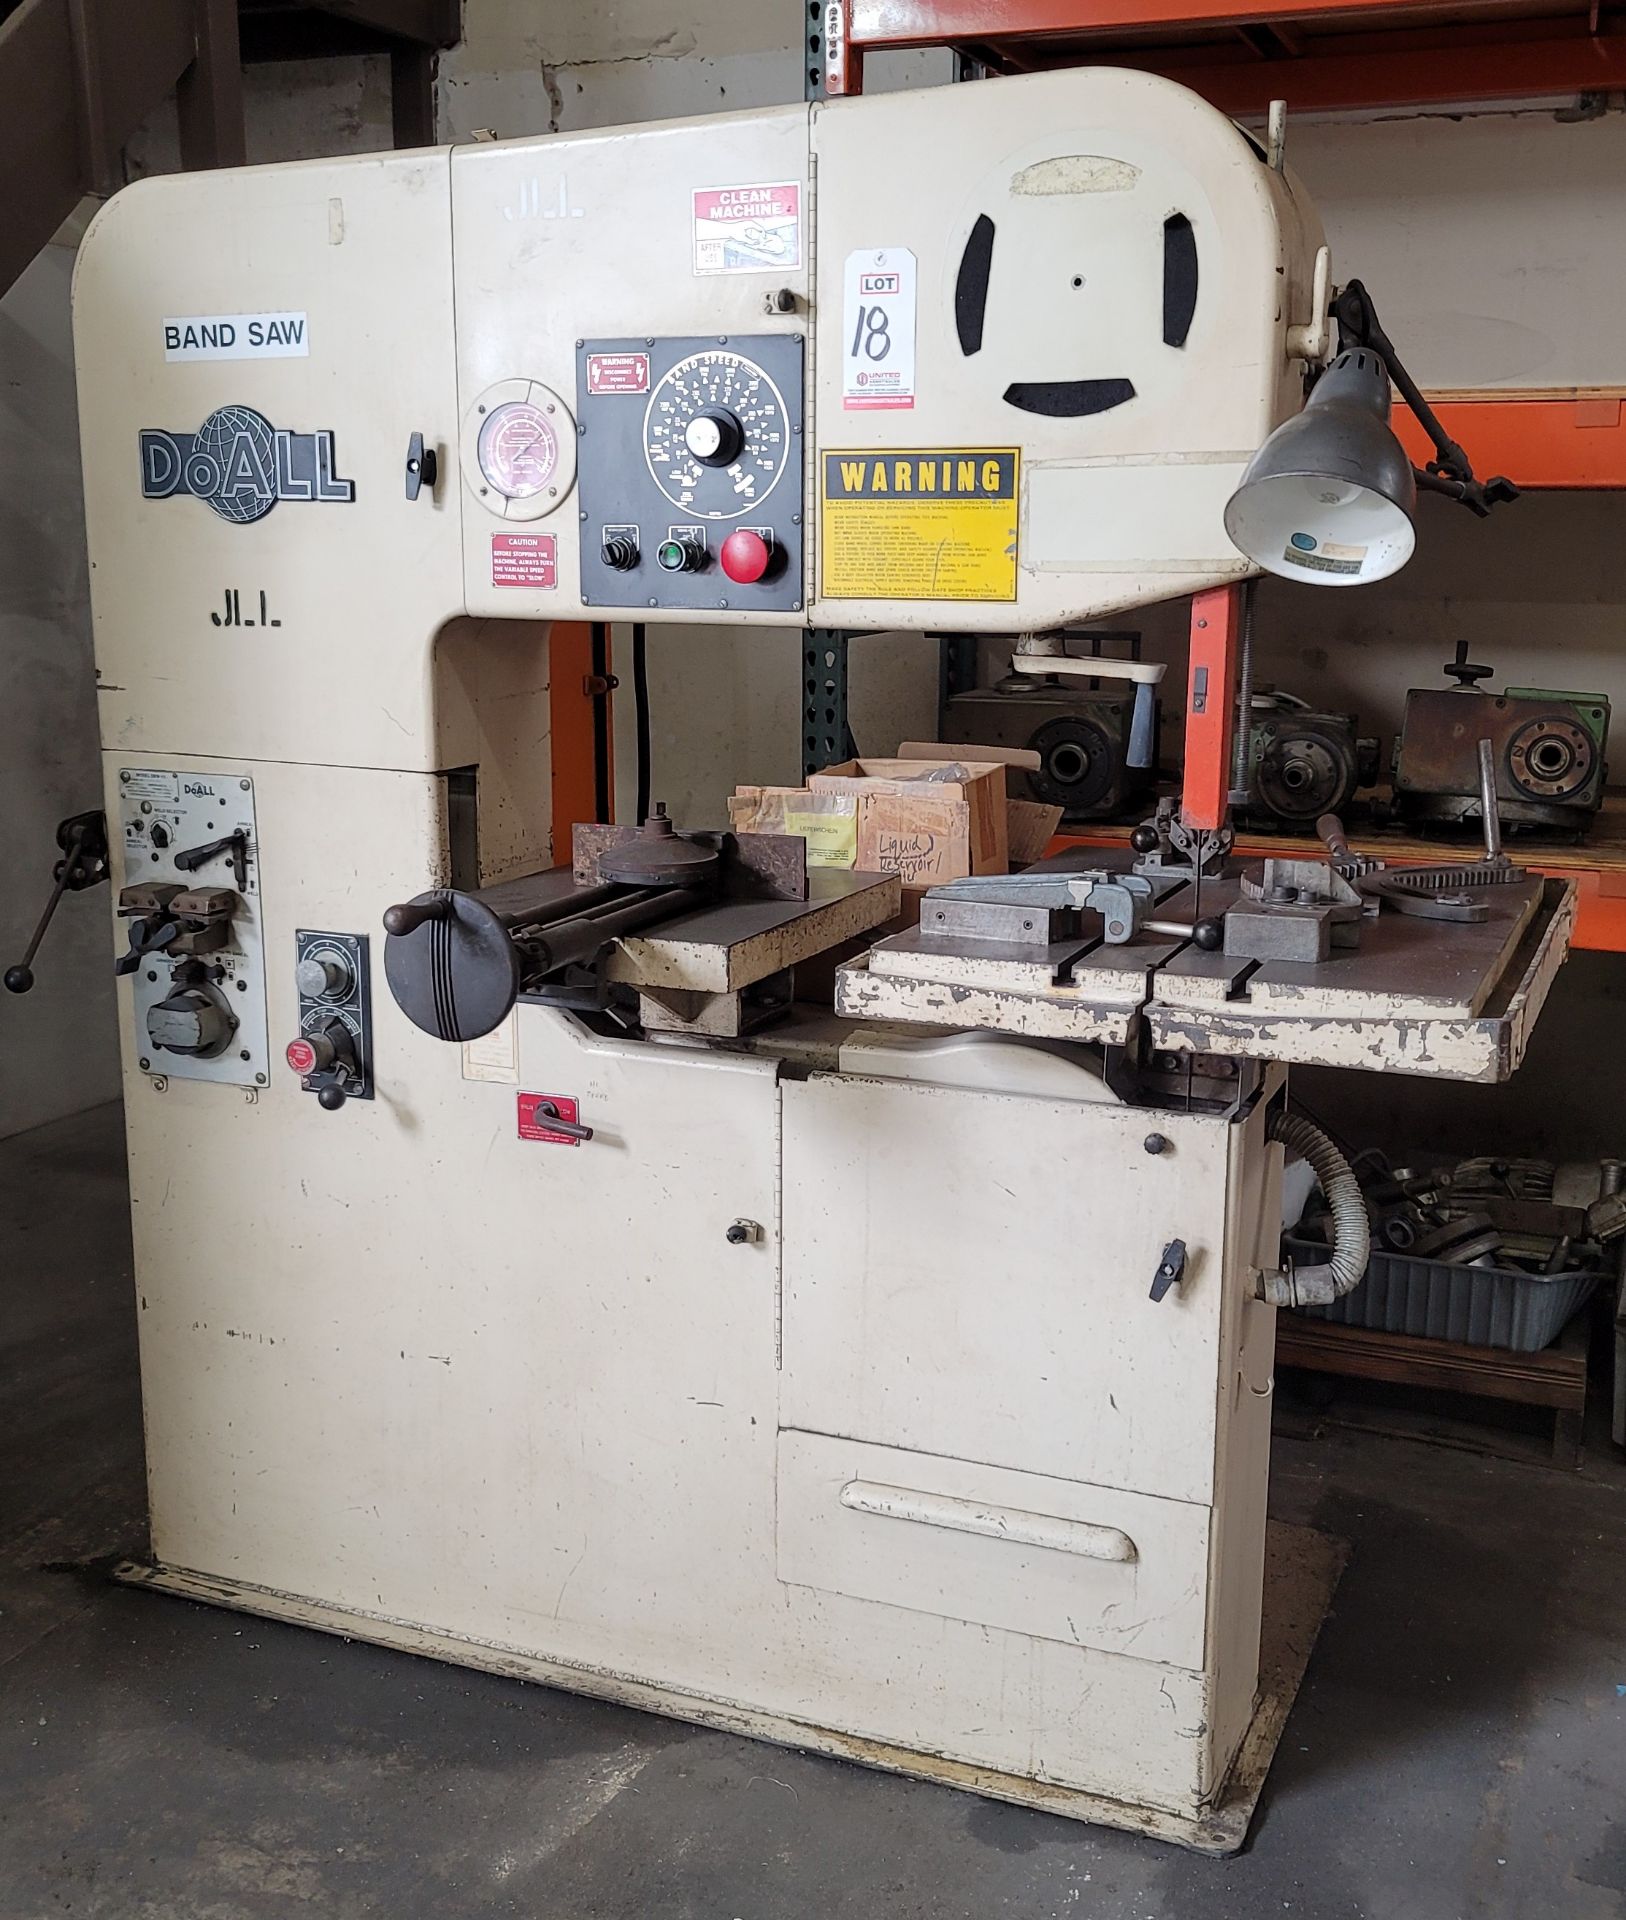 DOALL VERTICAL BAND SAW, MODEL 3612-2H3, 36" THROAT, 26.5" X 33.5" TABLE, S/N 401-88217 - Image 2 of 9